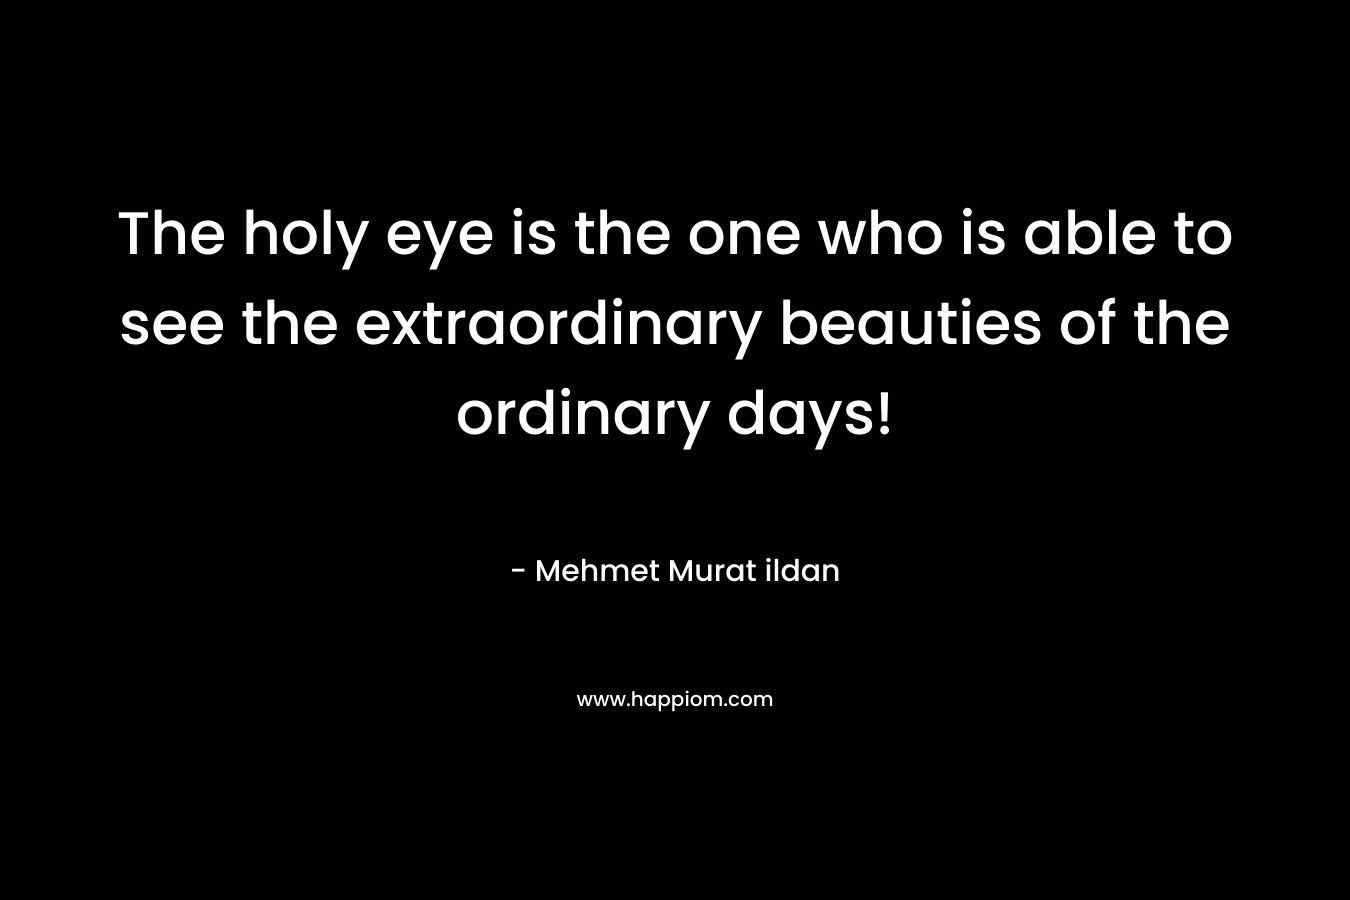 The holy eye is the one who is able to see the extraordinary beauties of the ordinary days! – Mehmet Murat ildan